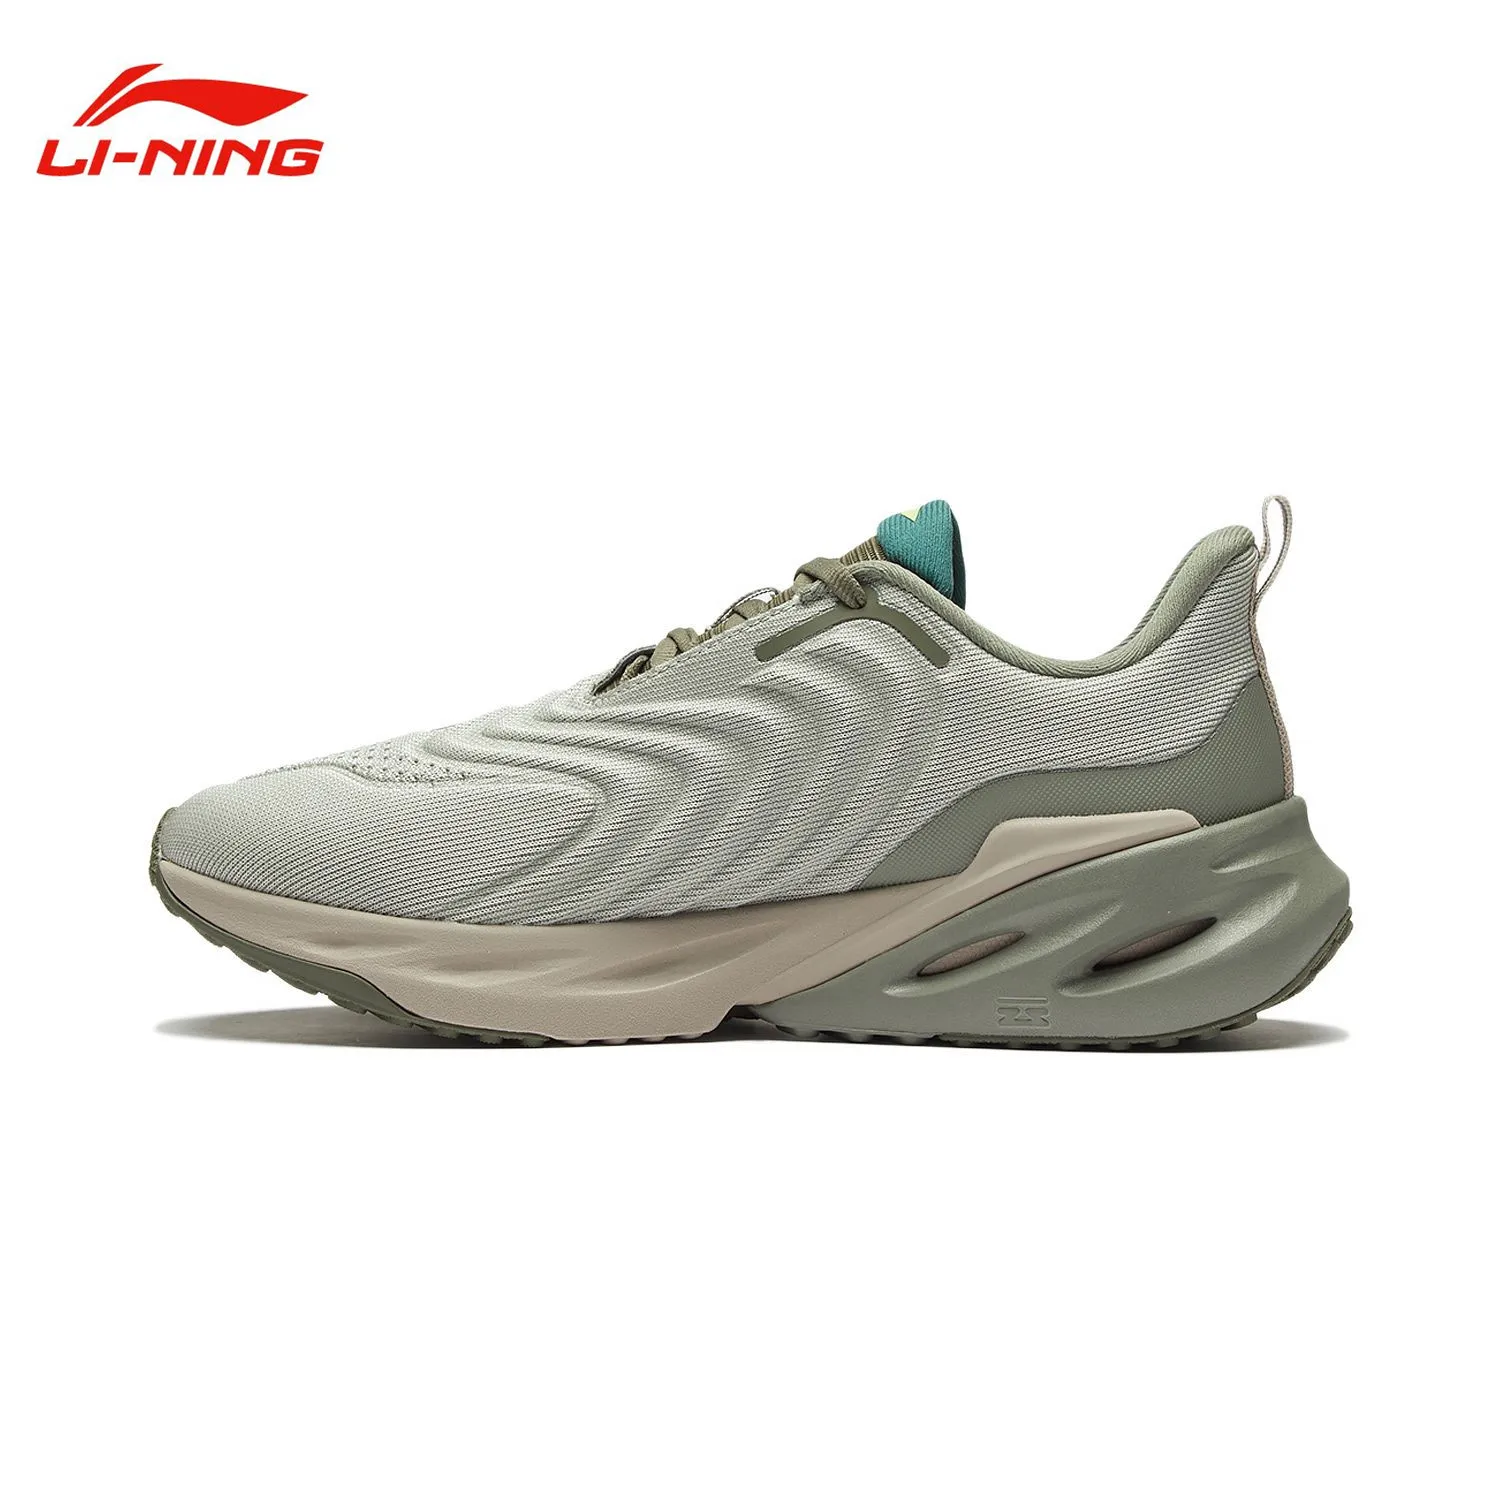 Li Ning running shoes men's shoes new casual easy-fit running shoes shock absorption rebound reflective comfortable sports shoes